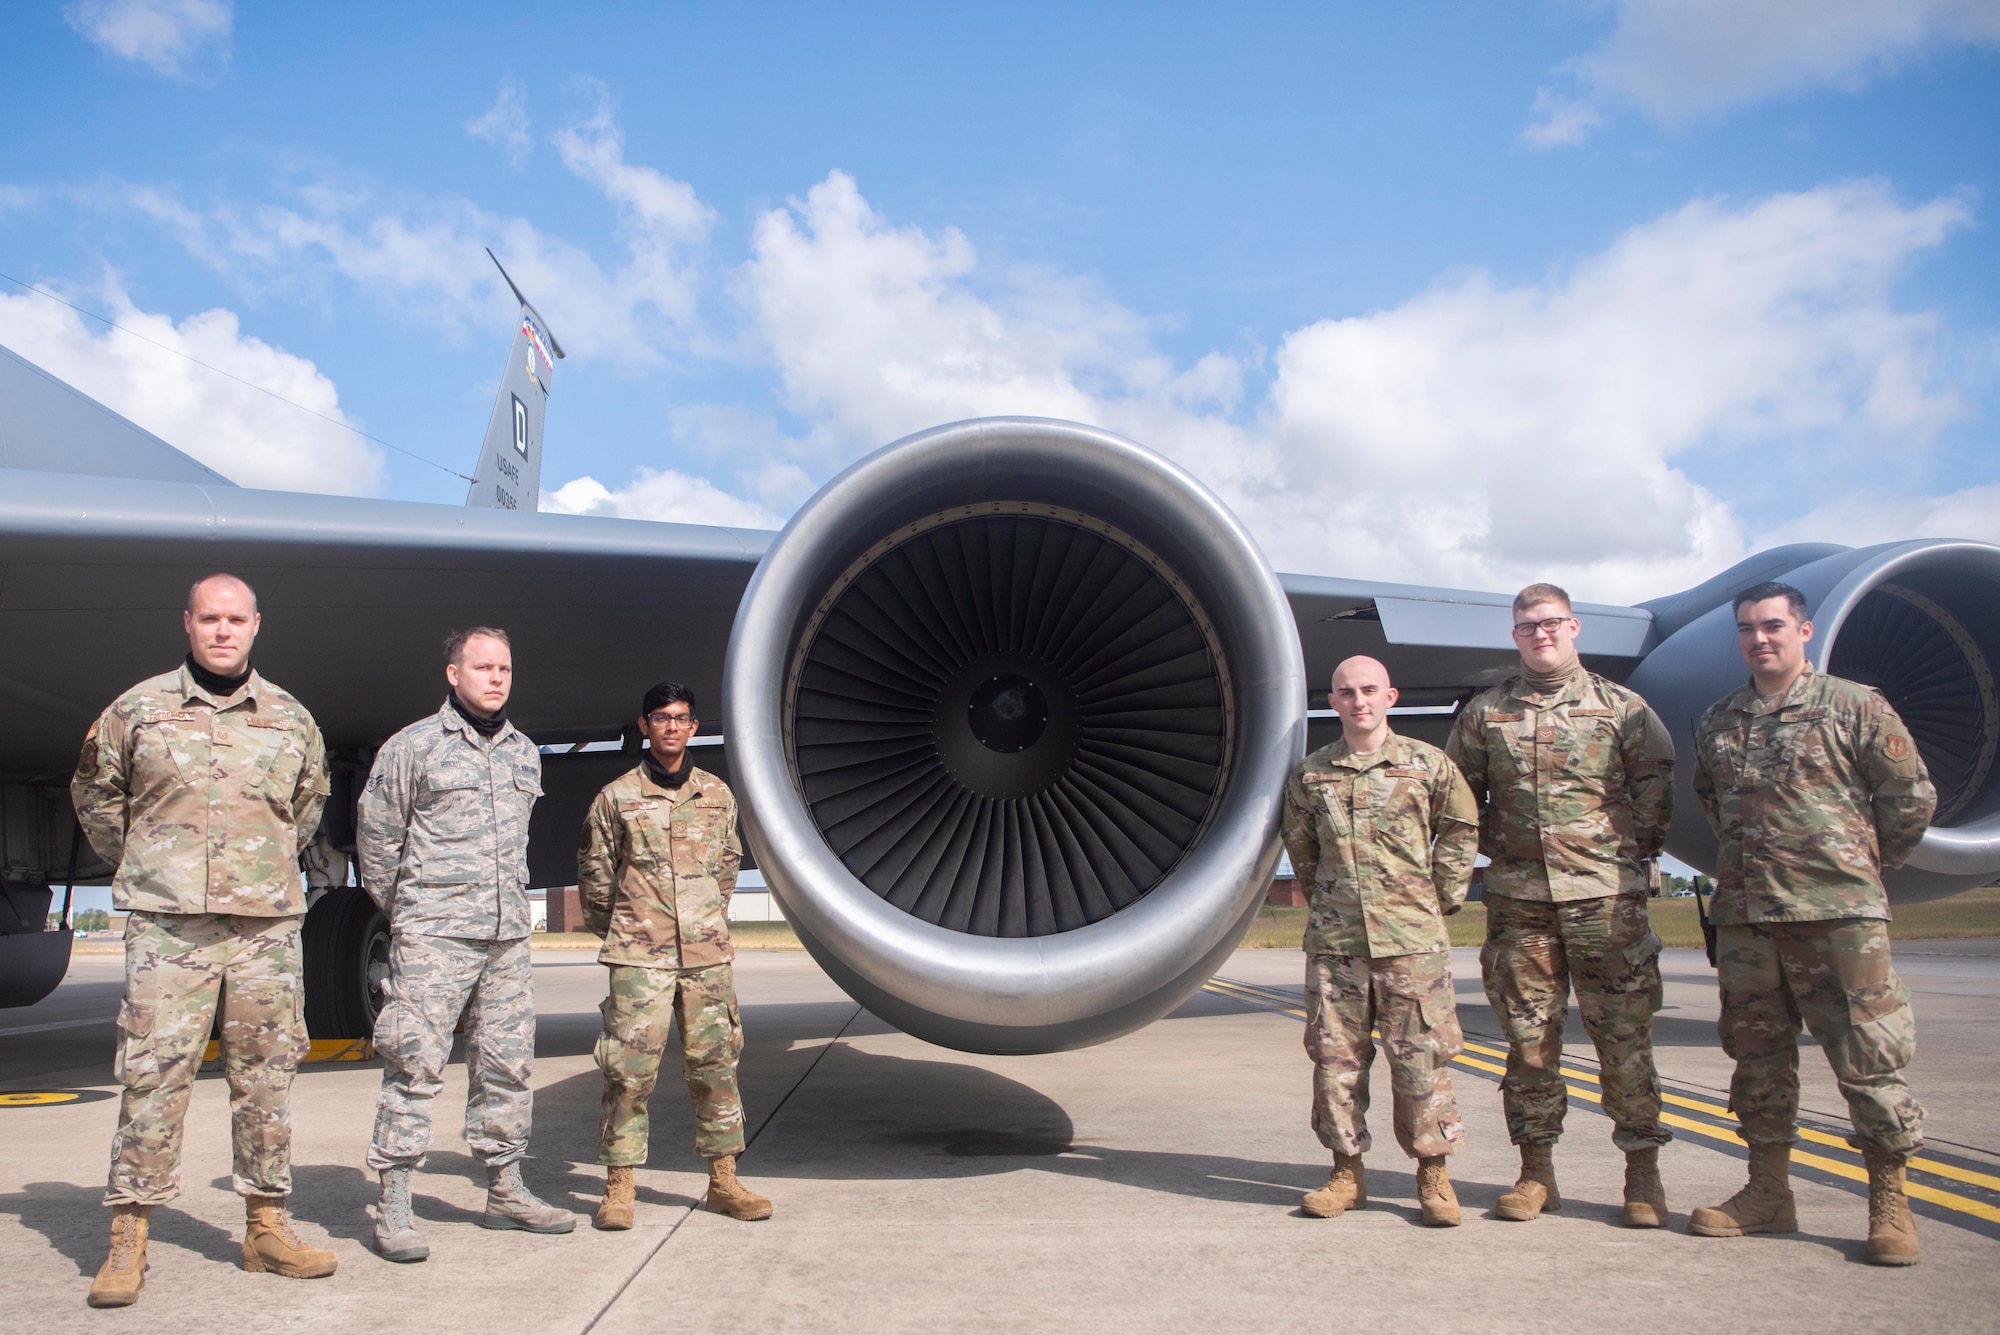 Members of the 100th Aircraft Maintenance Squadron Jet Shop pose for a photo in front of a KC-135 Stratotanker F108 turbofan engine at RAF Mildenhall, England, June 9, 2020. The shop maintains all KC-135 engines on base, supporting the wing in strategic aerial refueling objectives. (U.S. Air Force photo by Airman 1st Class Joseph Barron)